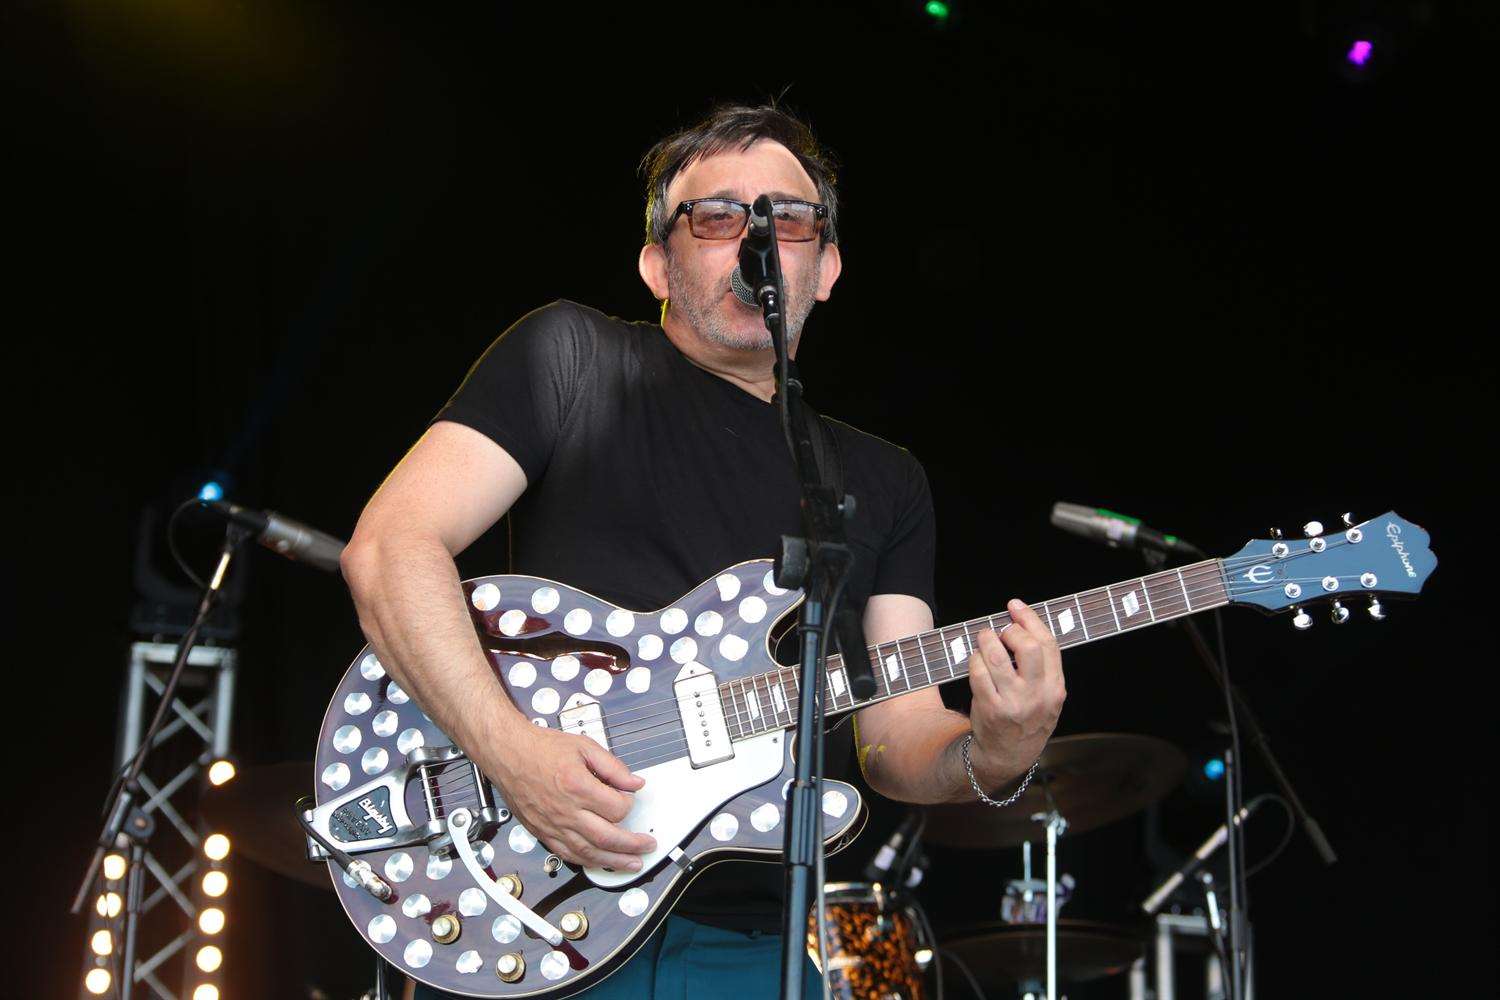 Ian Broudie of the Lightning Seeds takes to the stage.